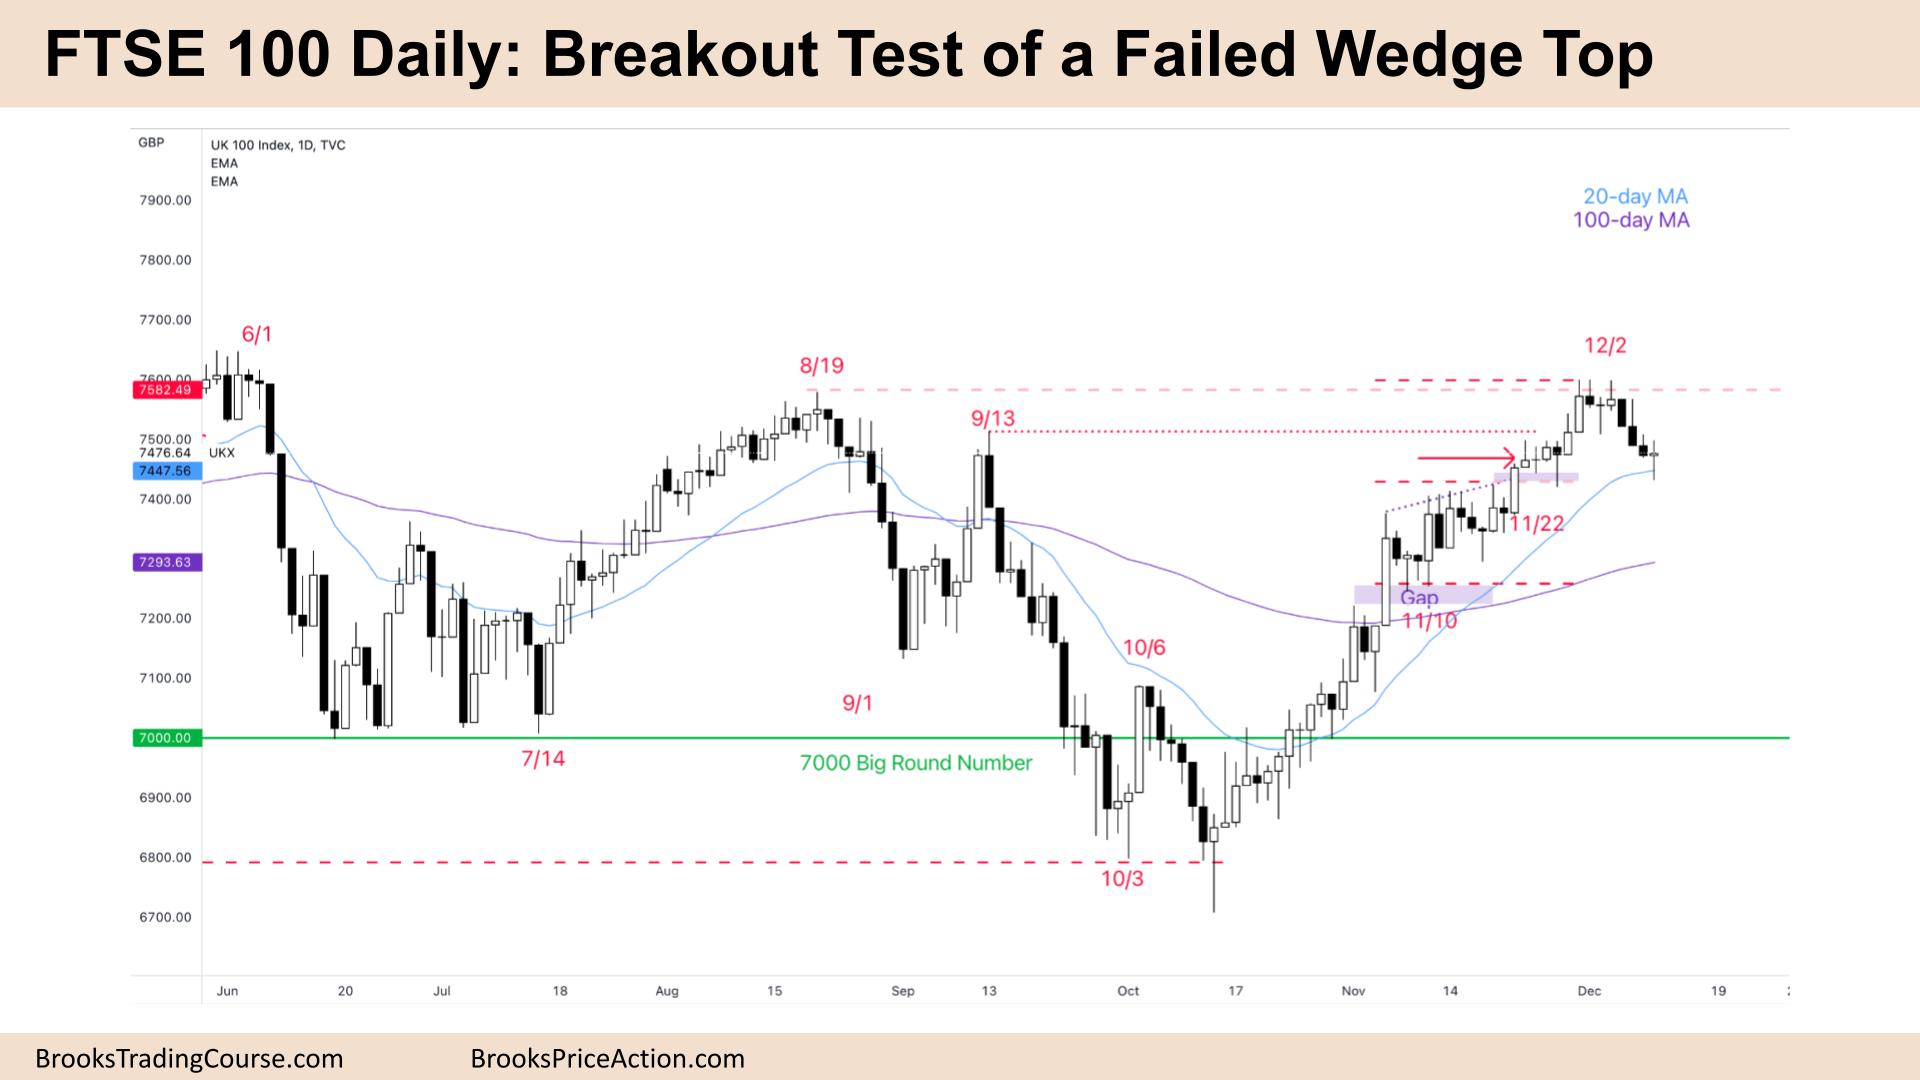 FTSE 100 Breakout Test of a Failed Wedge Top